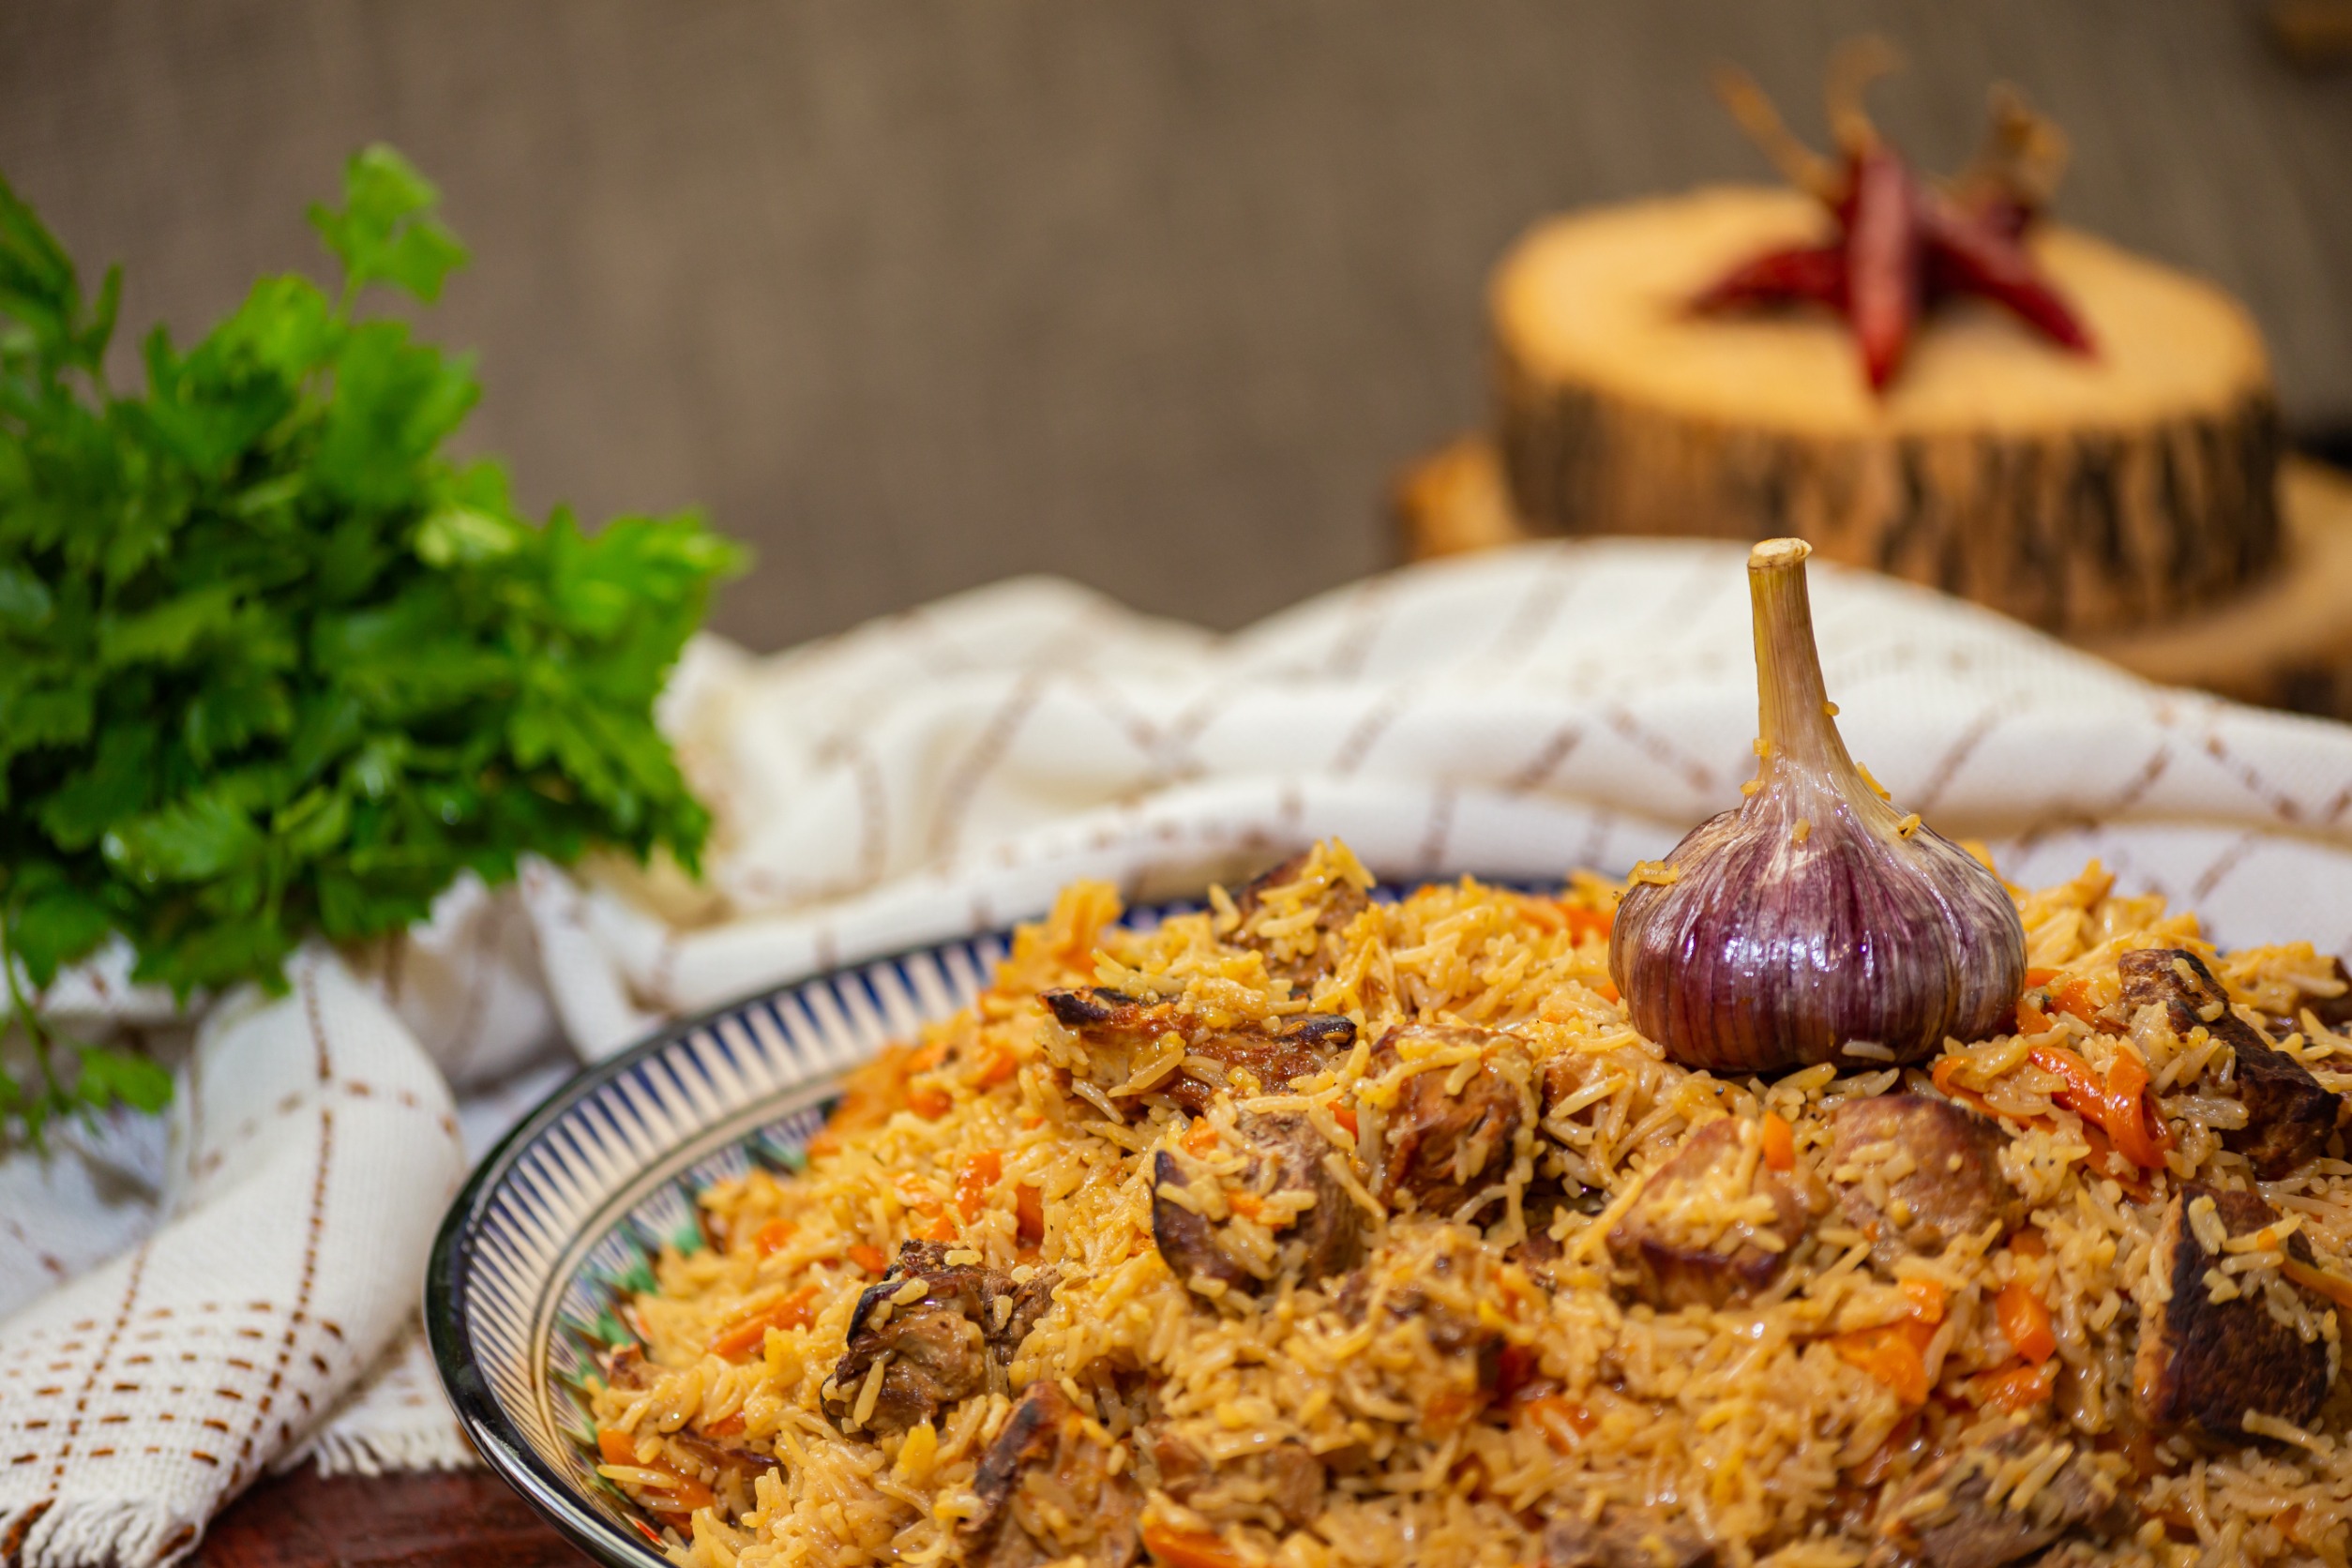 What Makes Afghan Food Special?